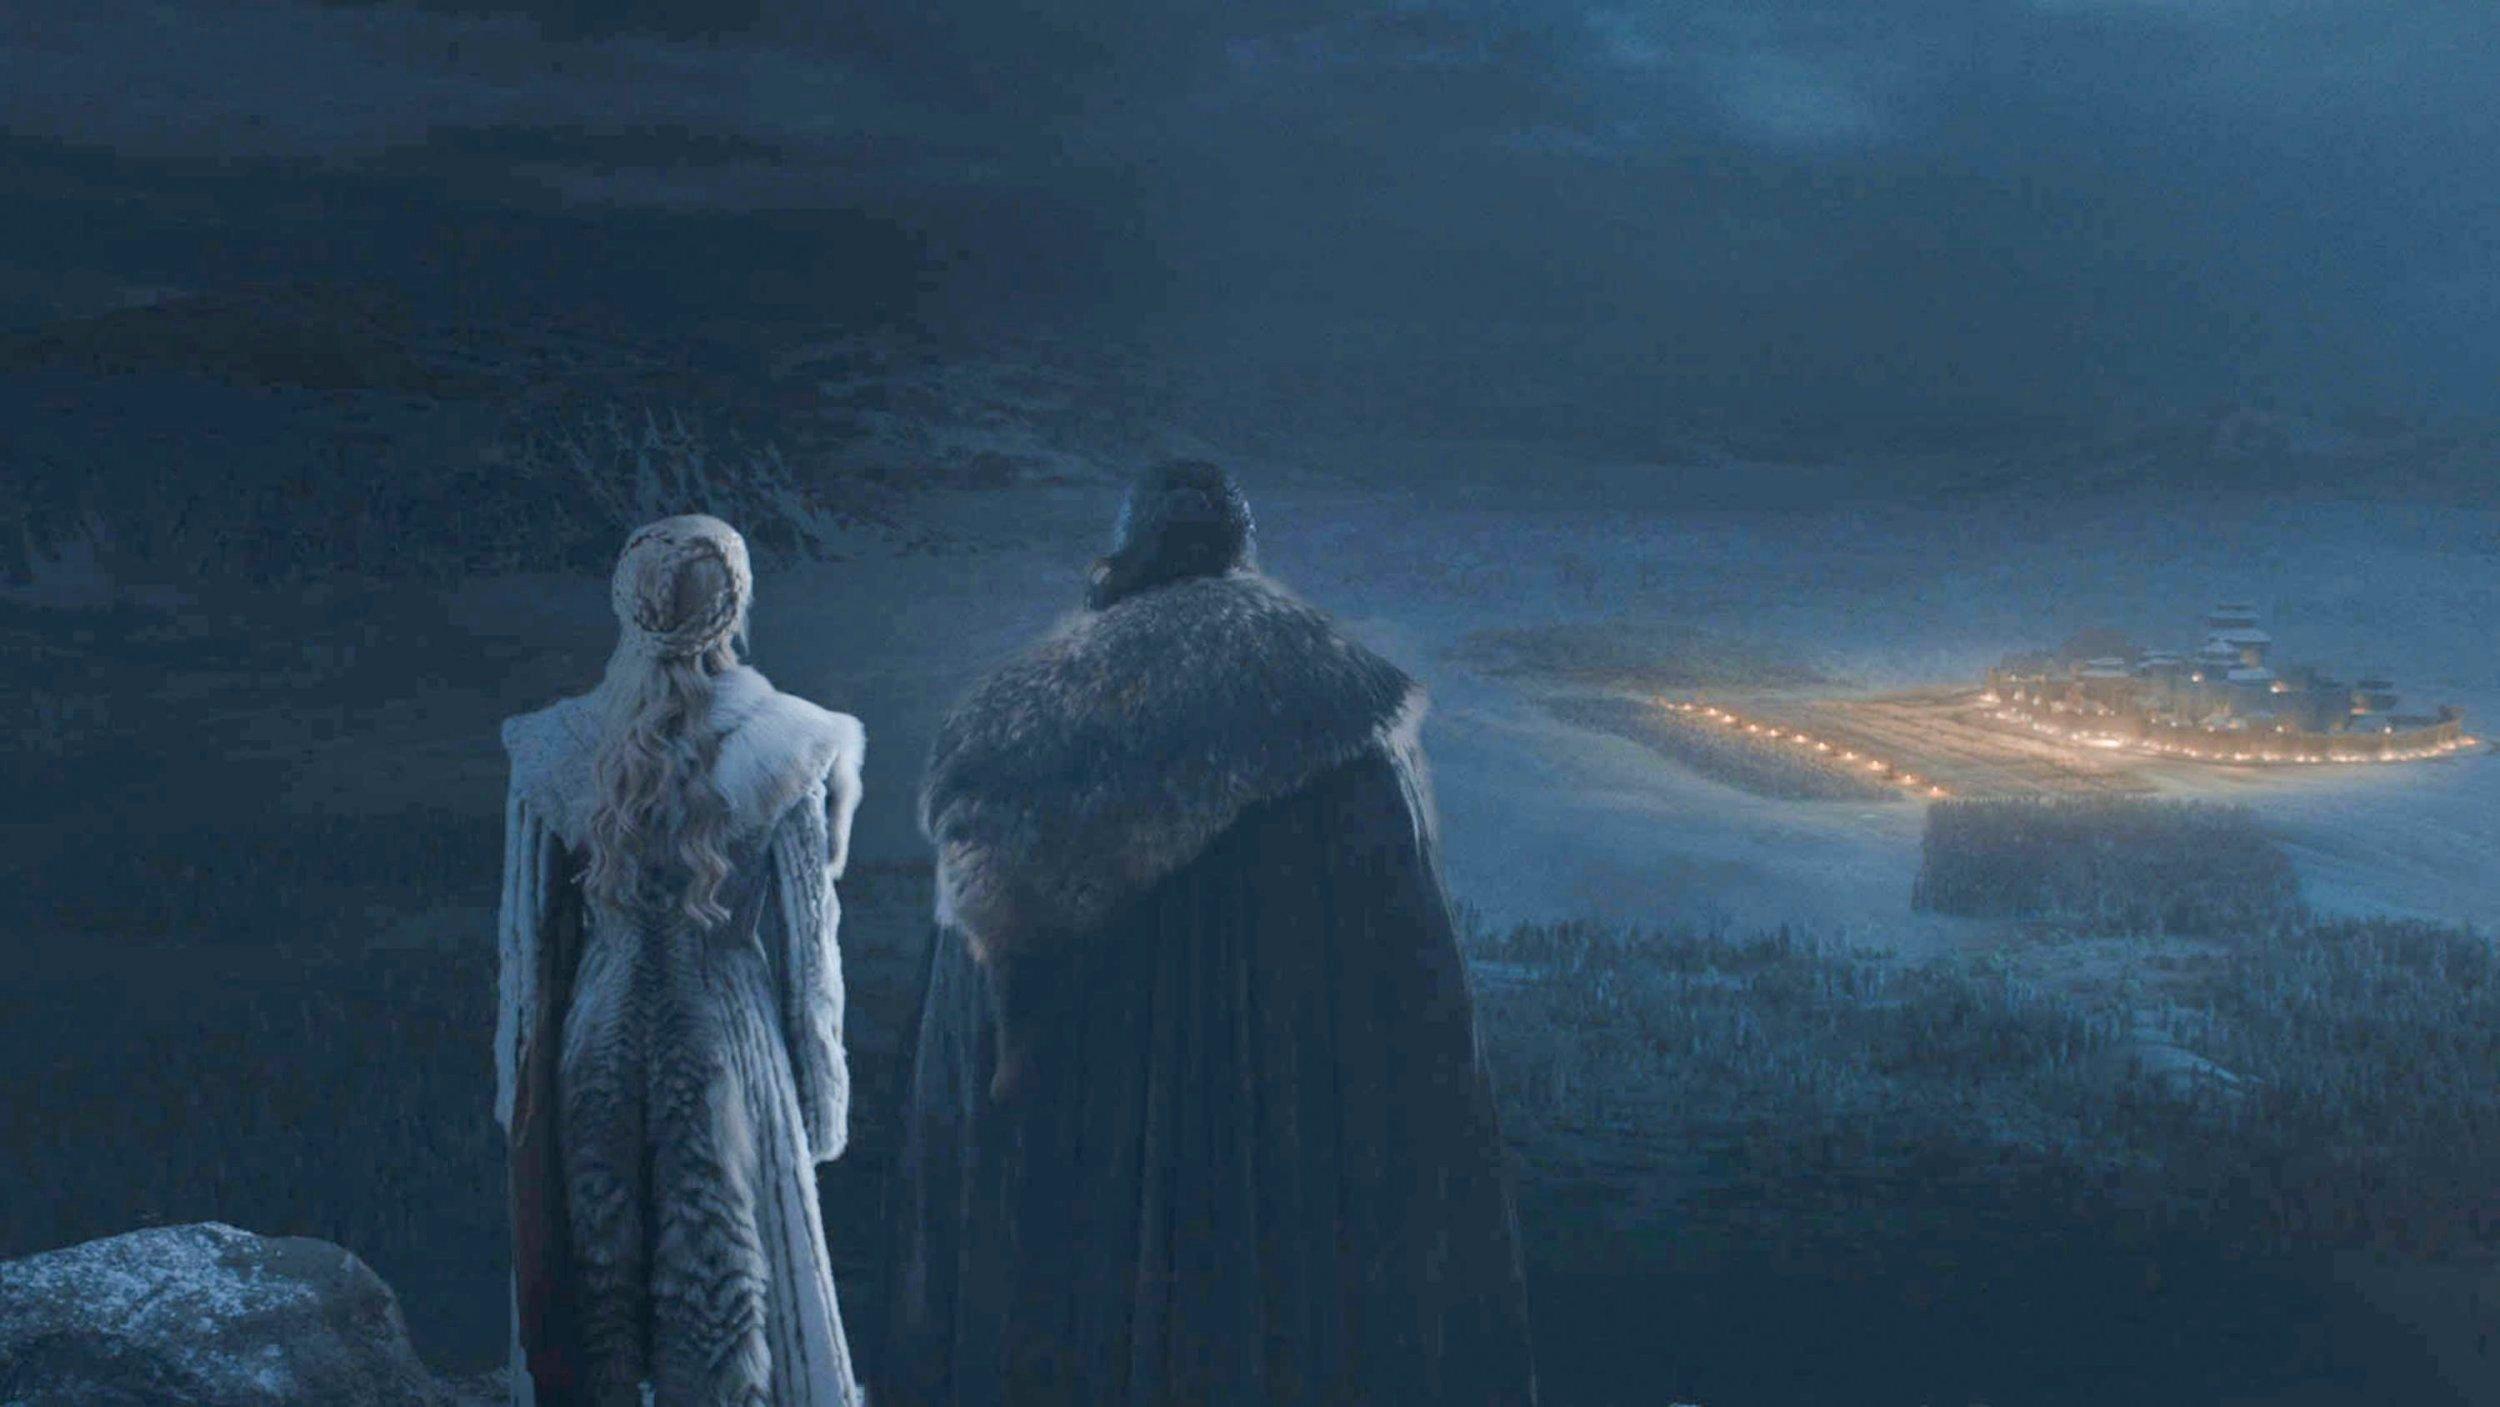 Game of Thrones' Season 1 Easter Eggs — 7 Shocking Facts About the